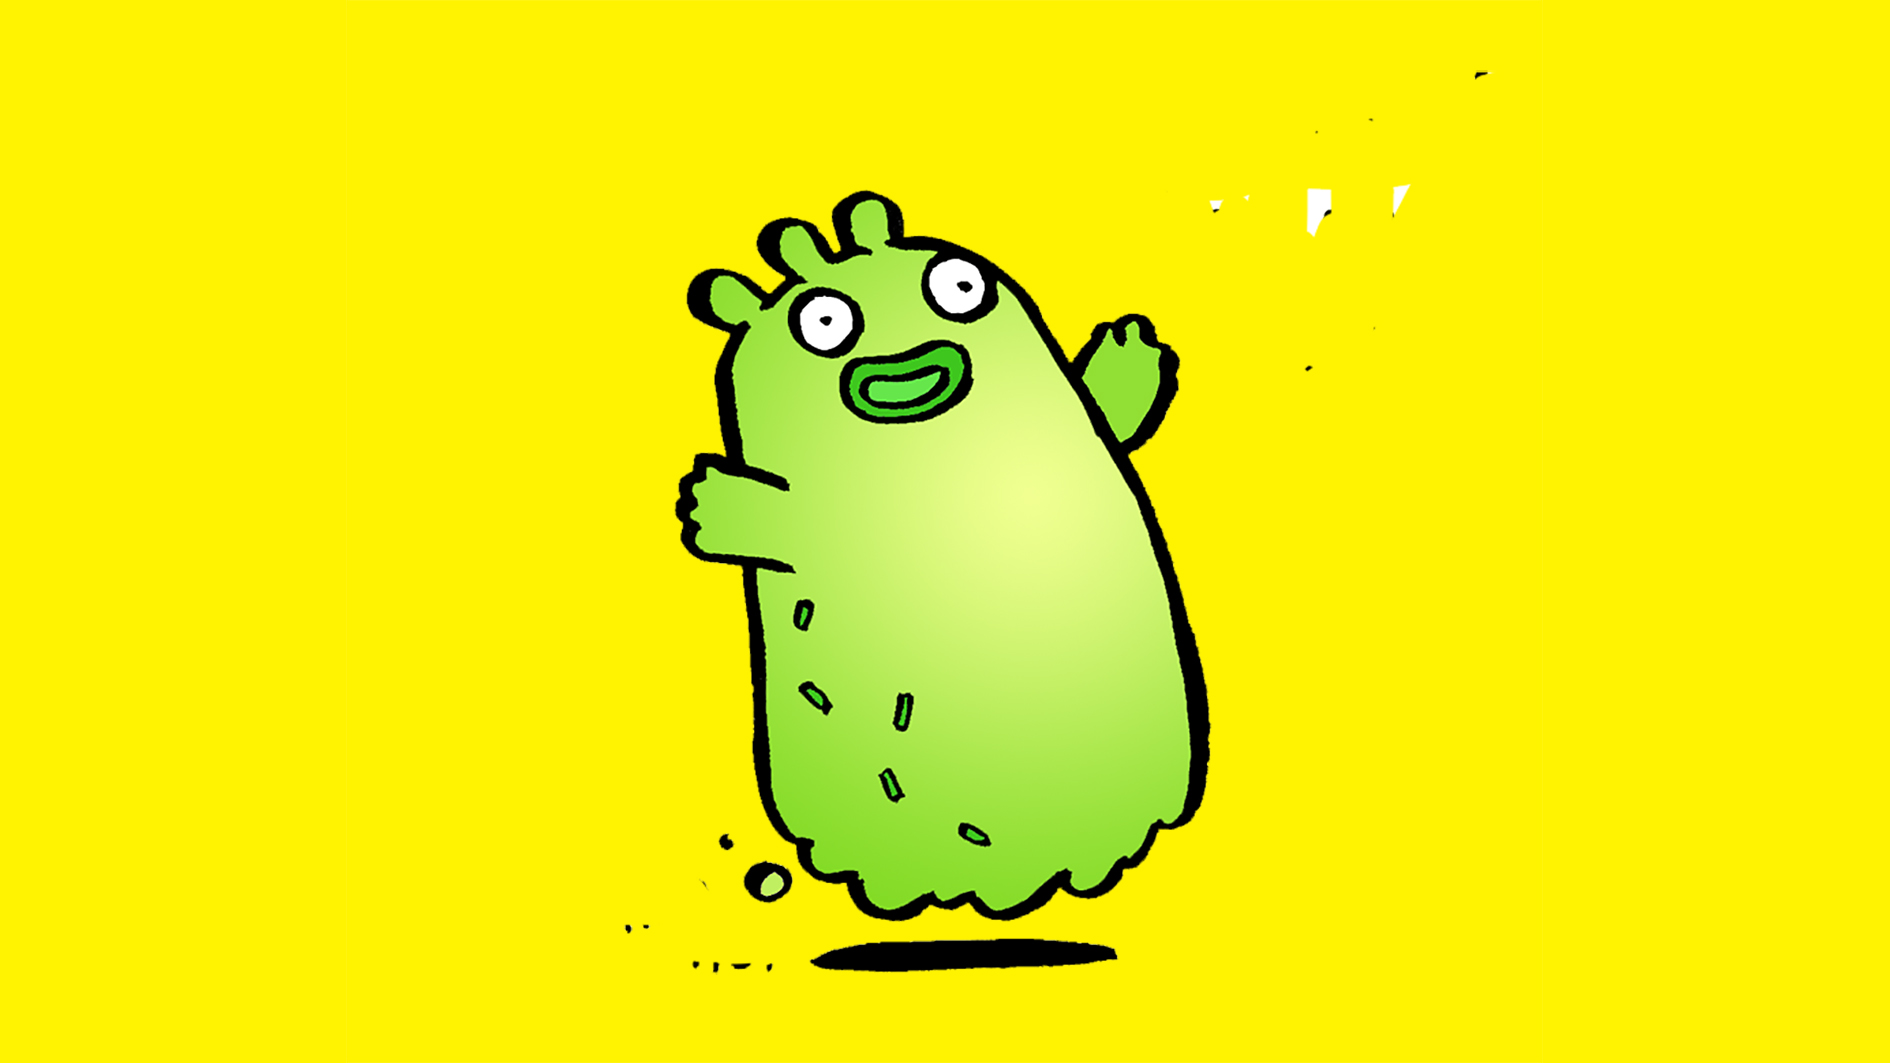 Thinngummyblob, the not so evil henchman made from slime